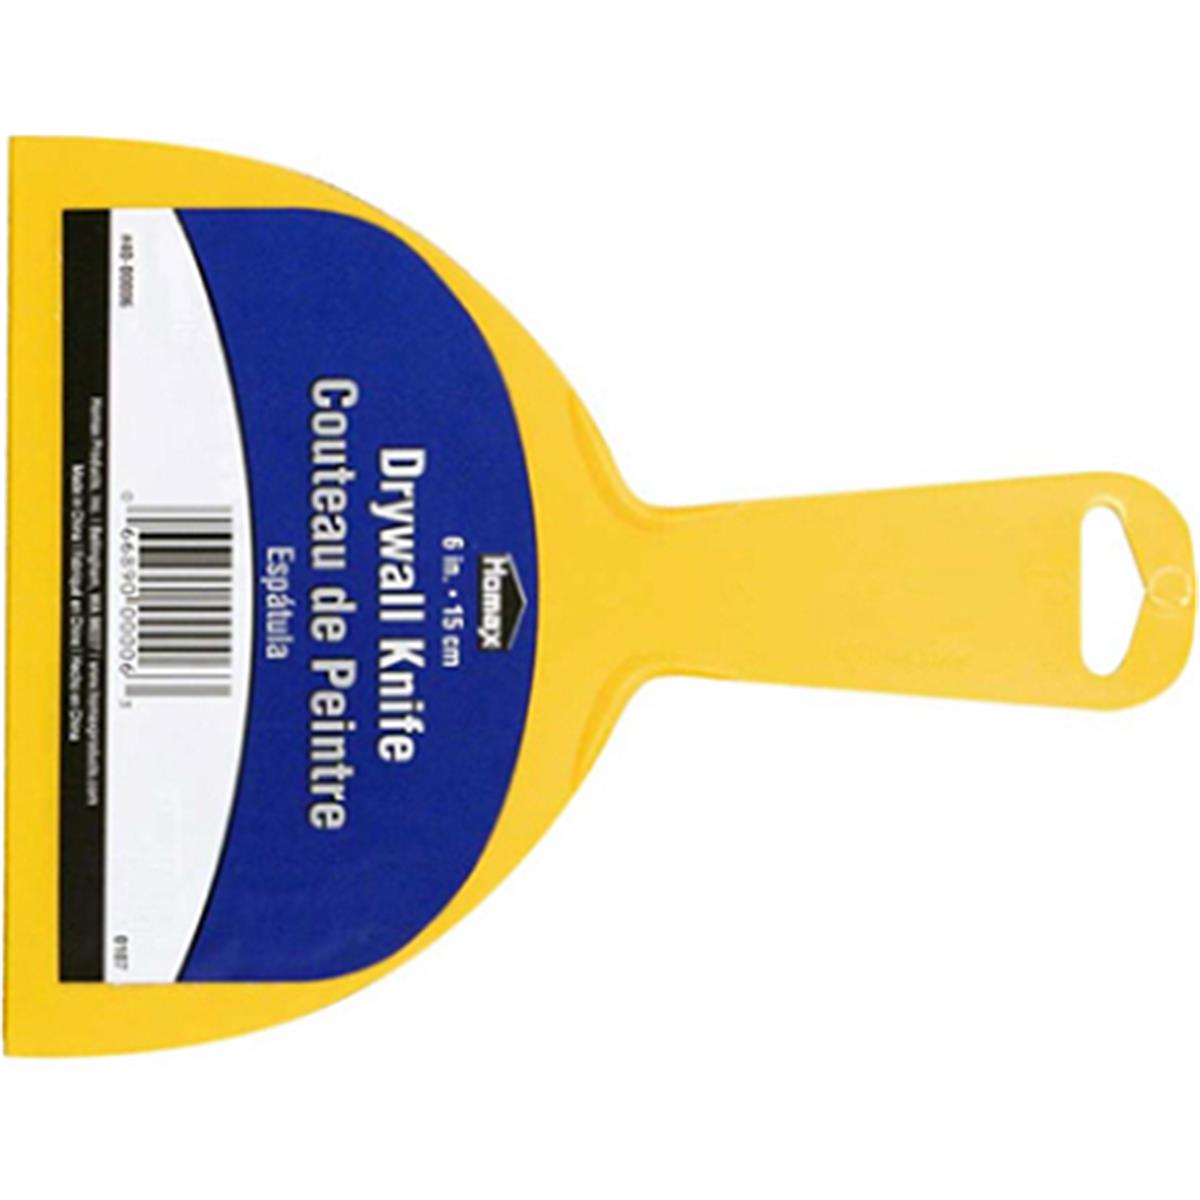 40-00006 6 In. Drywall Heavy Duty Taping Knife, Yellow